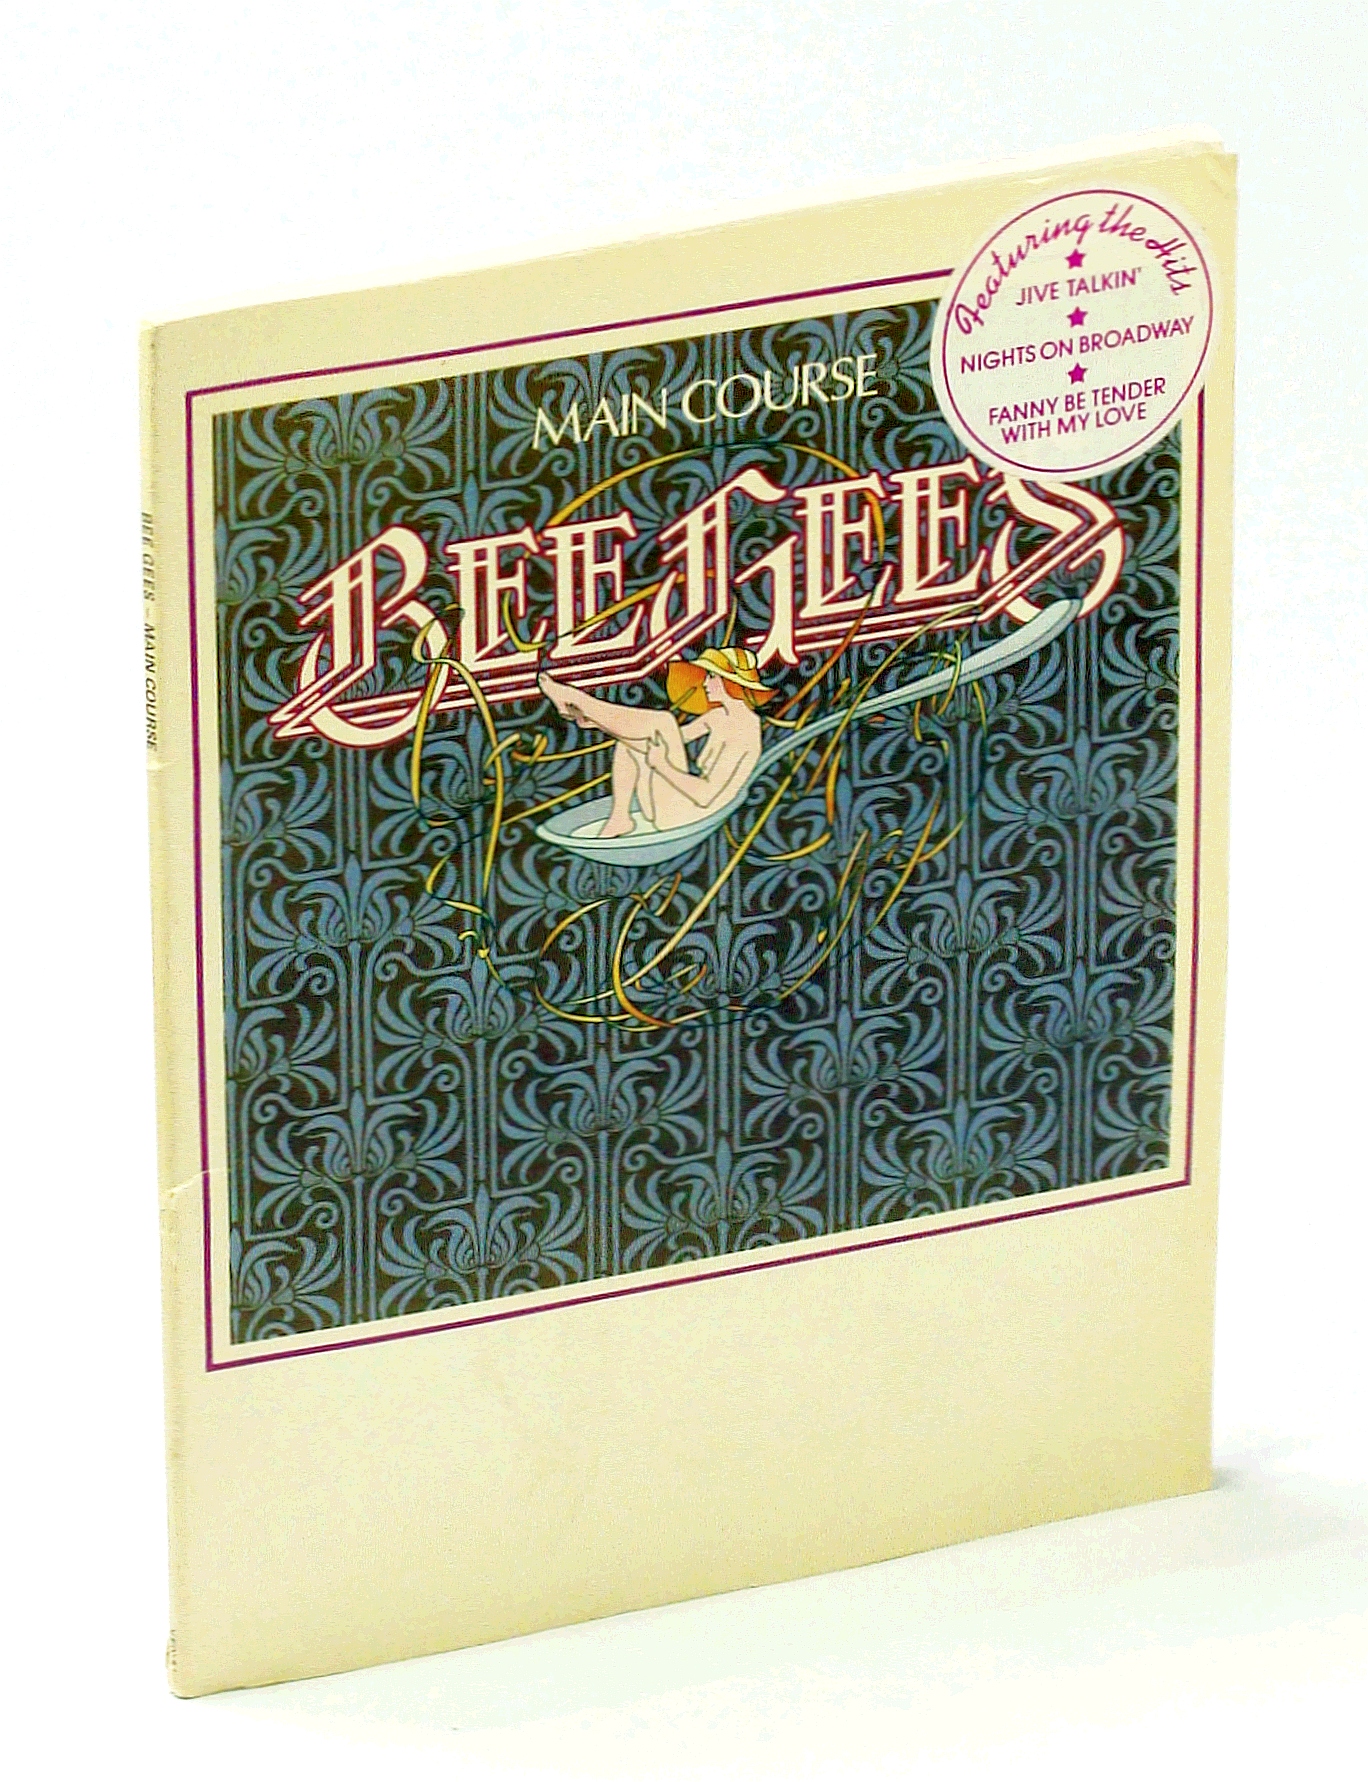 THE BEE GEES; GIBB, BARRY; GIBB, ROBIN; GIBB, MAURICE - Main Course - Bee Gees Original Songbook with Piano Sheet Music, Lyrics and Guitar Chords